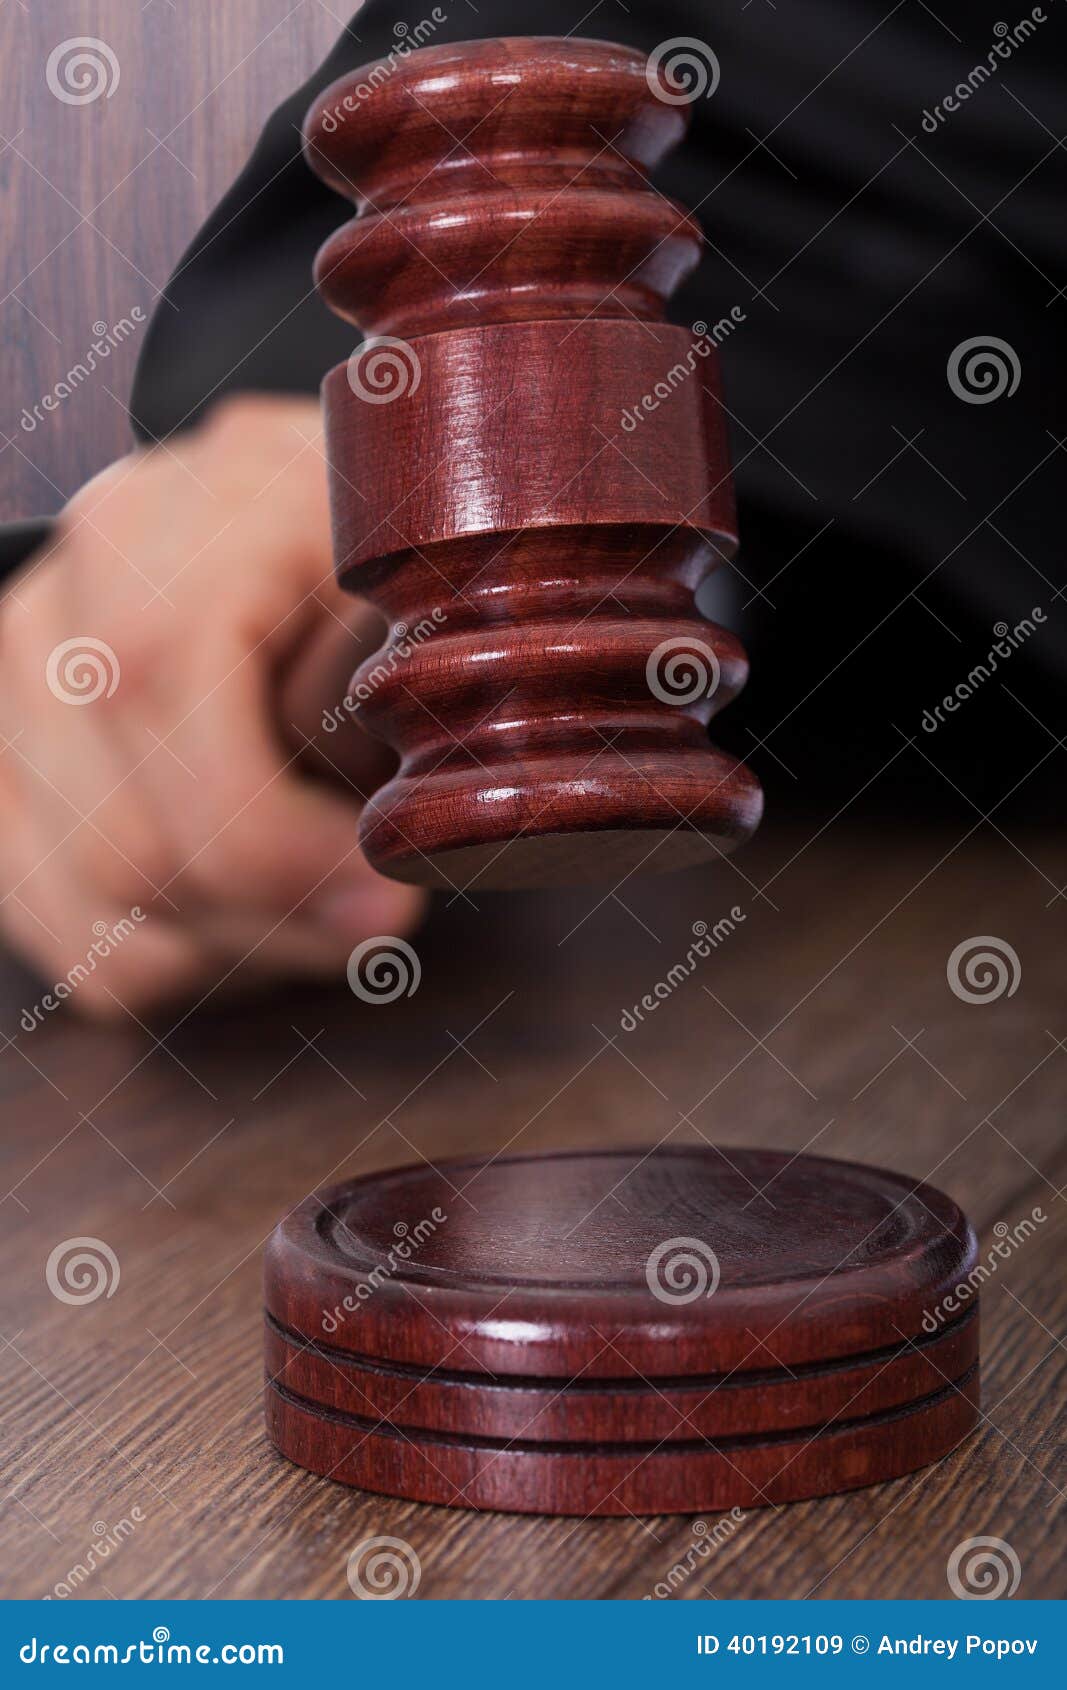 Judge Giving Verdict by Hitting Mallet Stock Image - Image of male